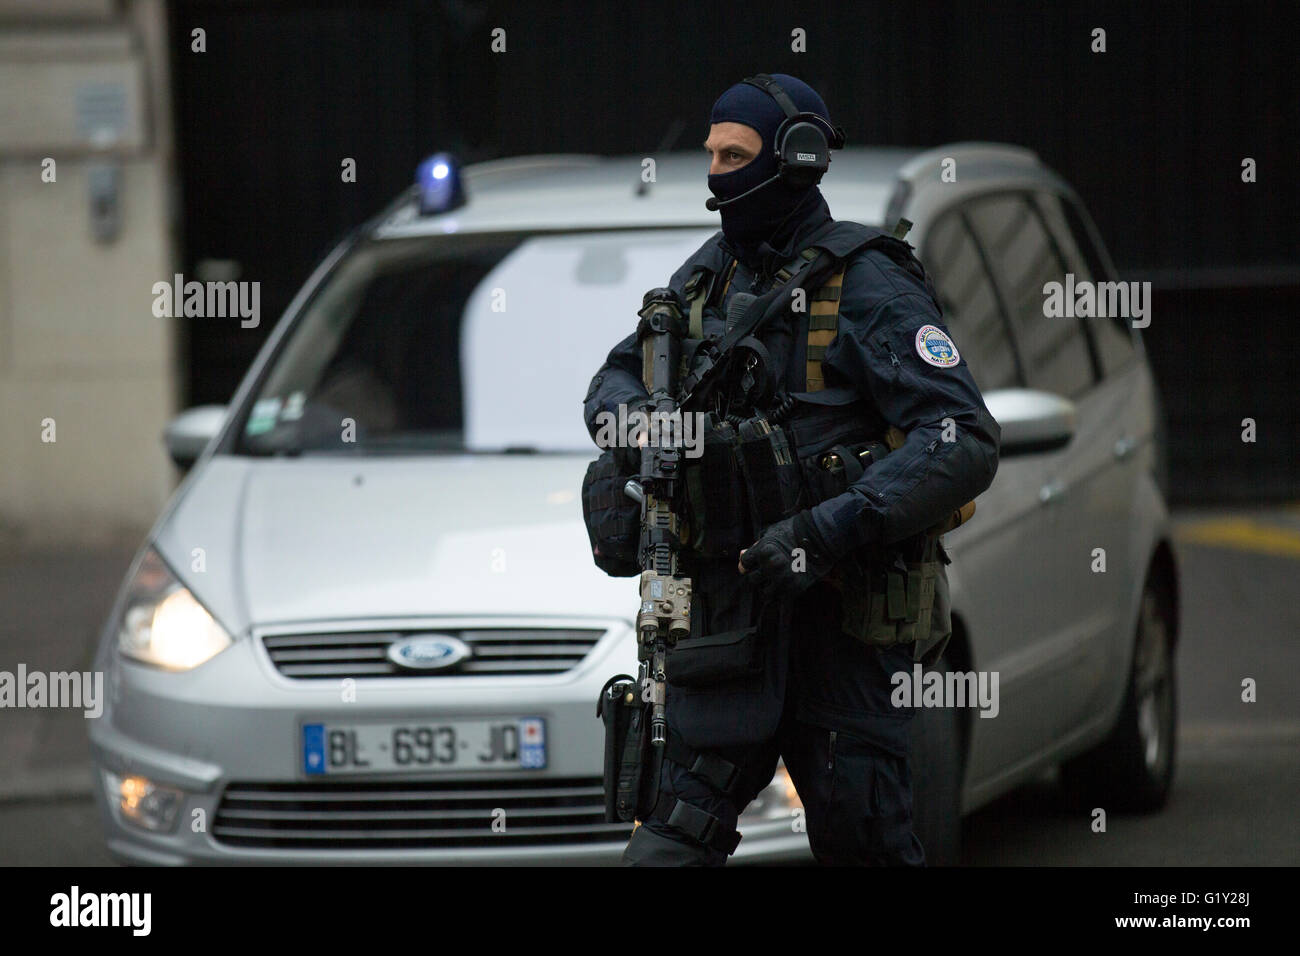 Paris, Paris. 20th May, 2016. Police stand guard outside the courthouse where Salah Abdeslam, the surviving suspect of last November's deadly Paris attacks, face questioning in Paris, France on May 20, 2016. Salah Abdeslam, the surviving suspect of last November's deadly Paris attacks, Friday appeared before a French anti-terror court for a first questioning, local media reported. © Michel Tiers/Xinhua/Alamy Live News Stock Photo